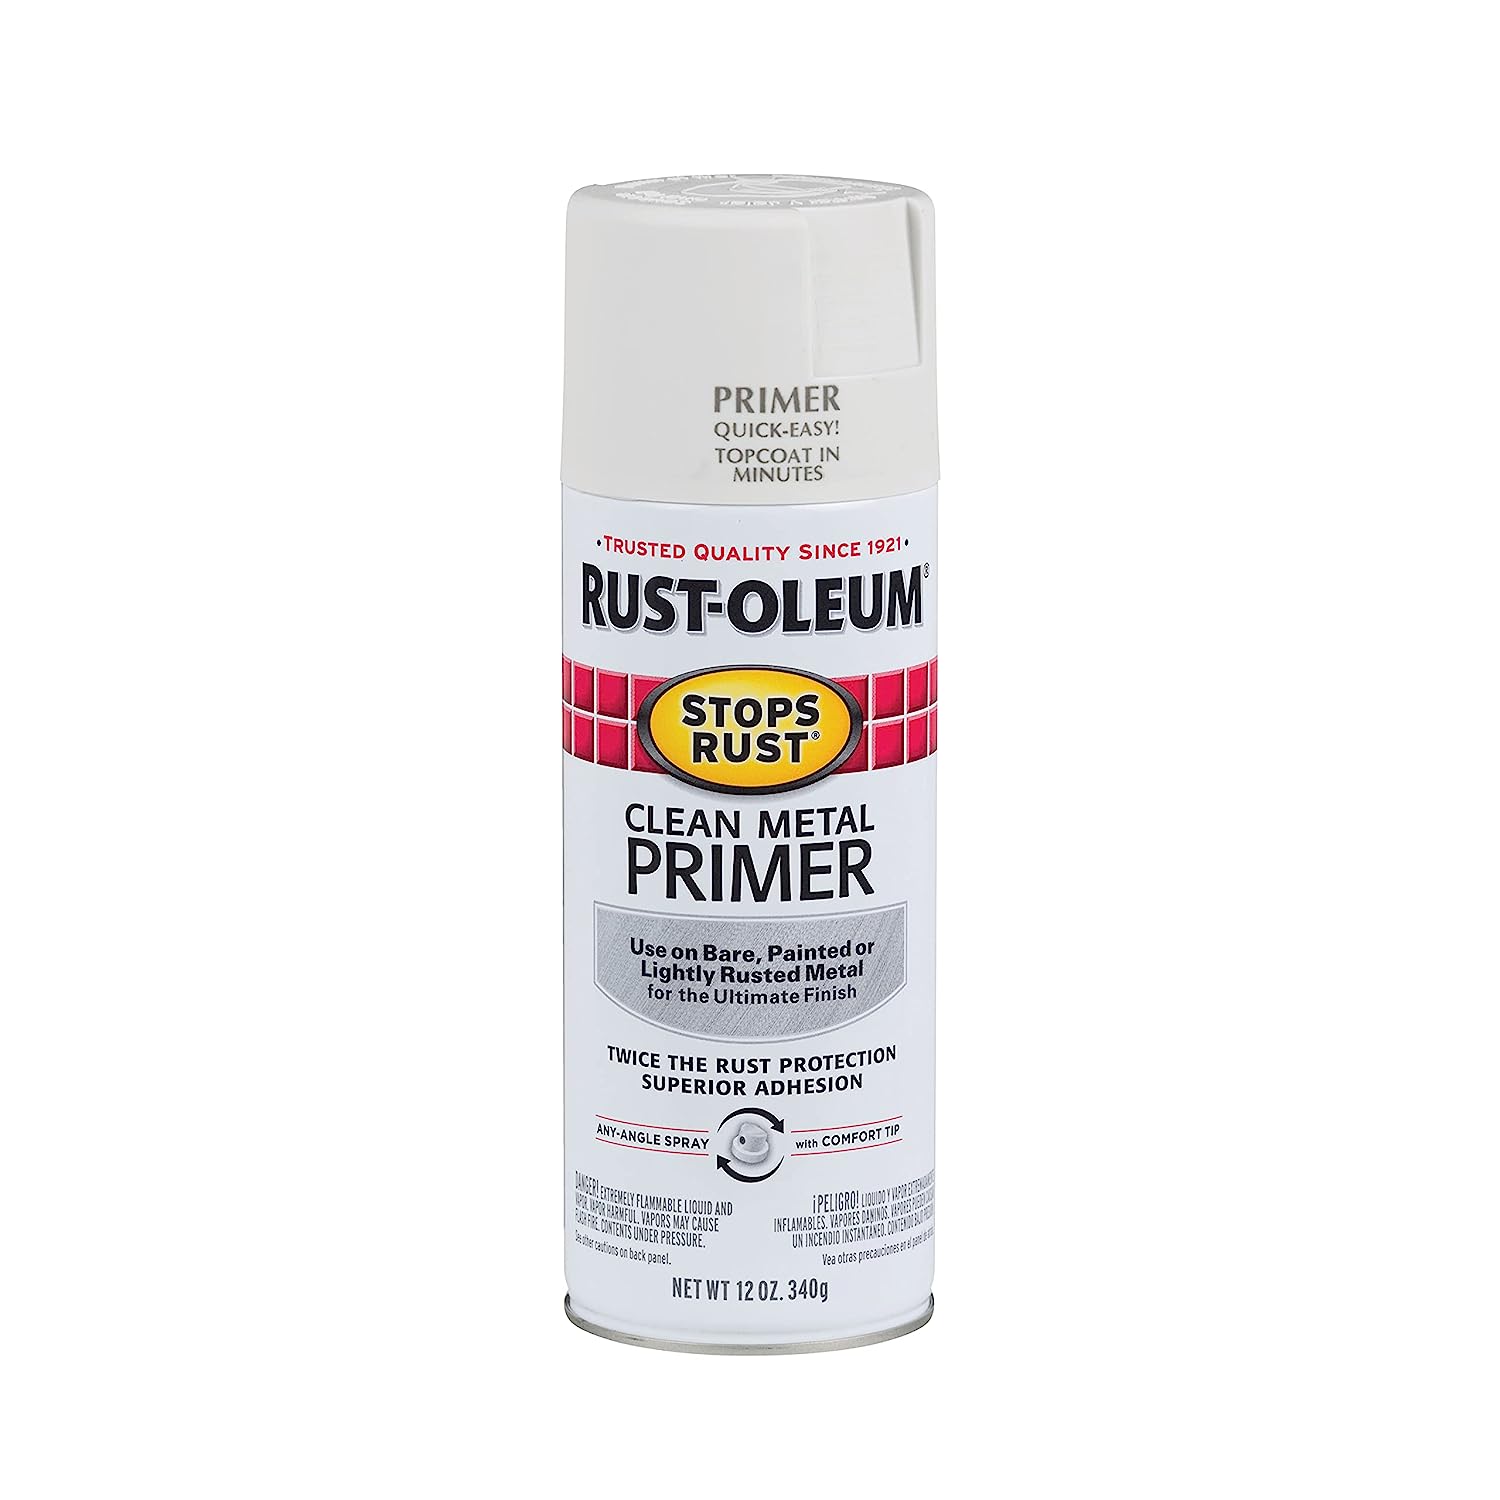 spray primer for metal detailed review